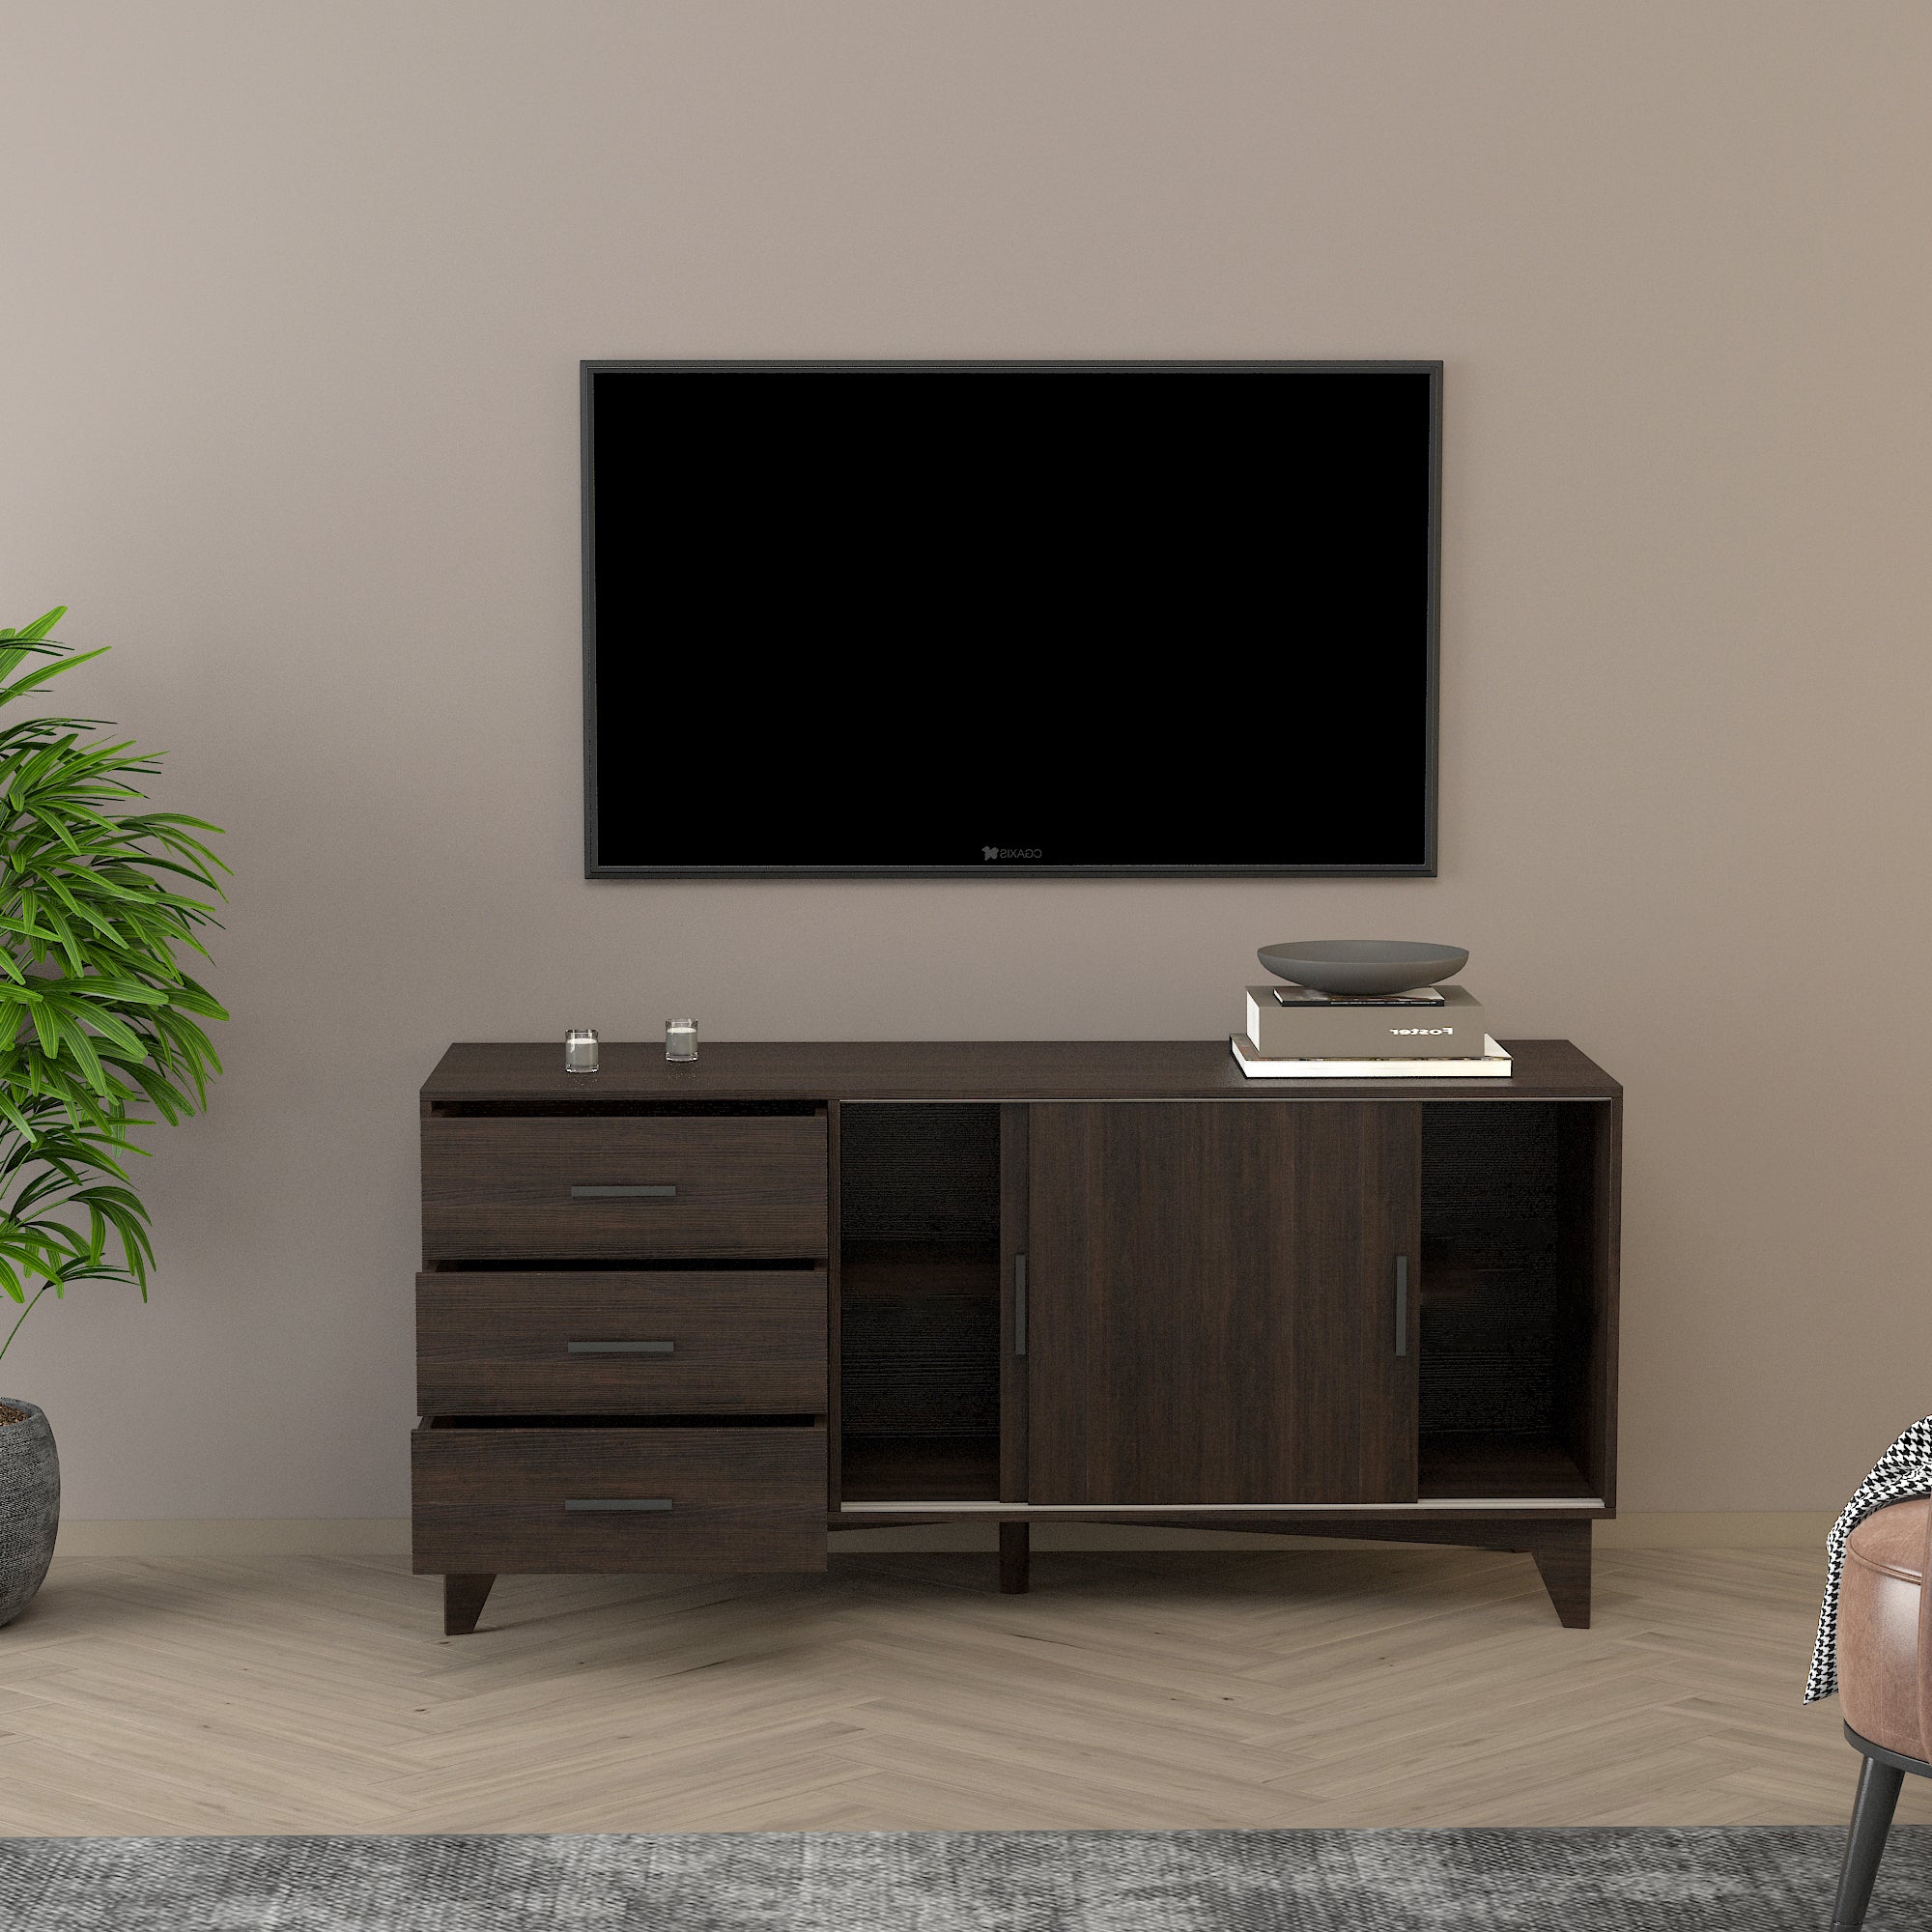 TV Stand with Sliding Doors and Drawers